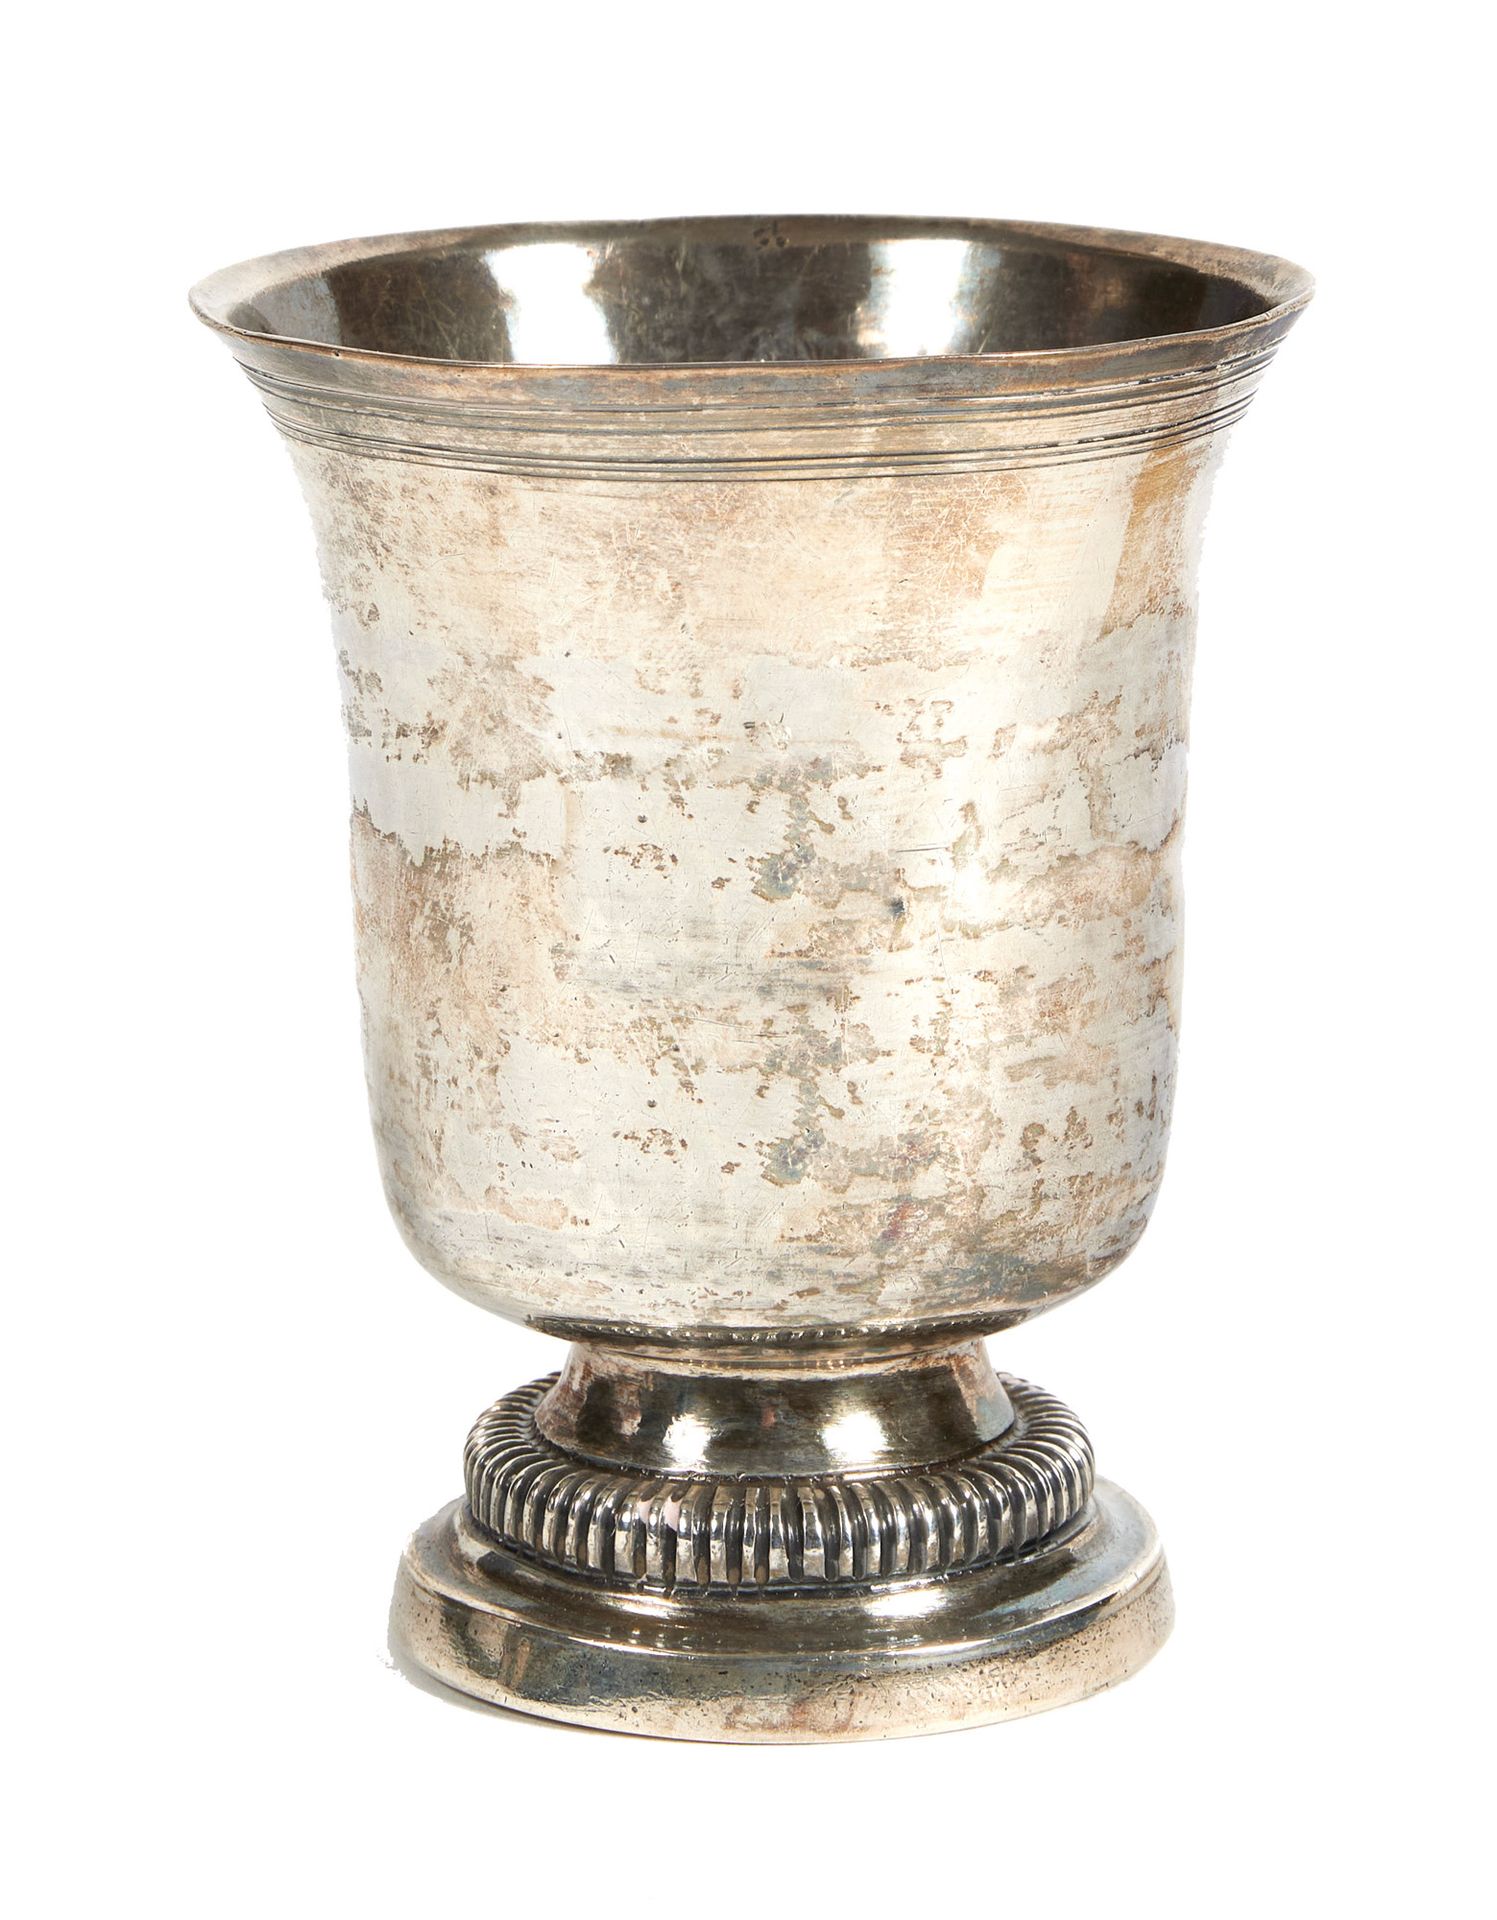 TIMBALE TULIPE EN ARGENT Silver tulip tumbler

Province, circa 1770, master-gold&hellip;